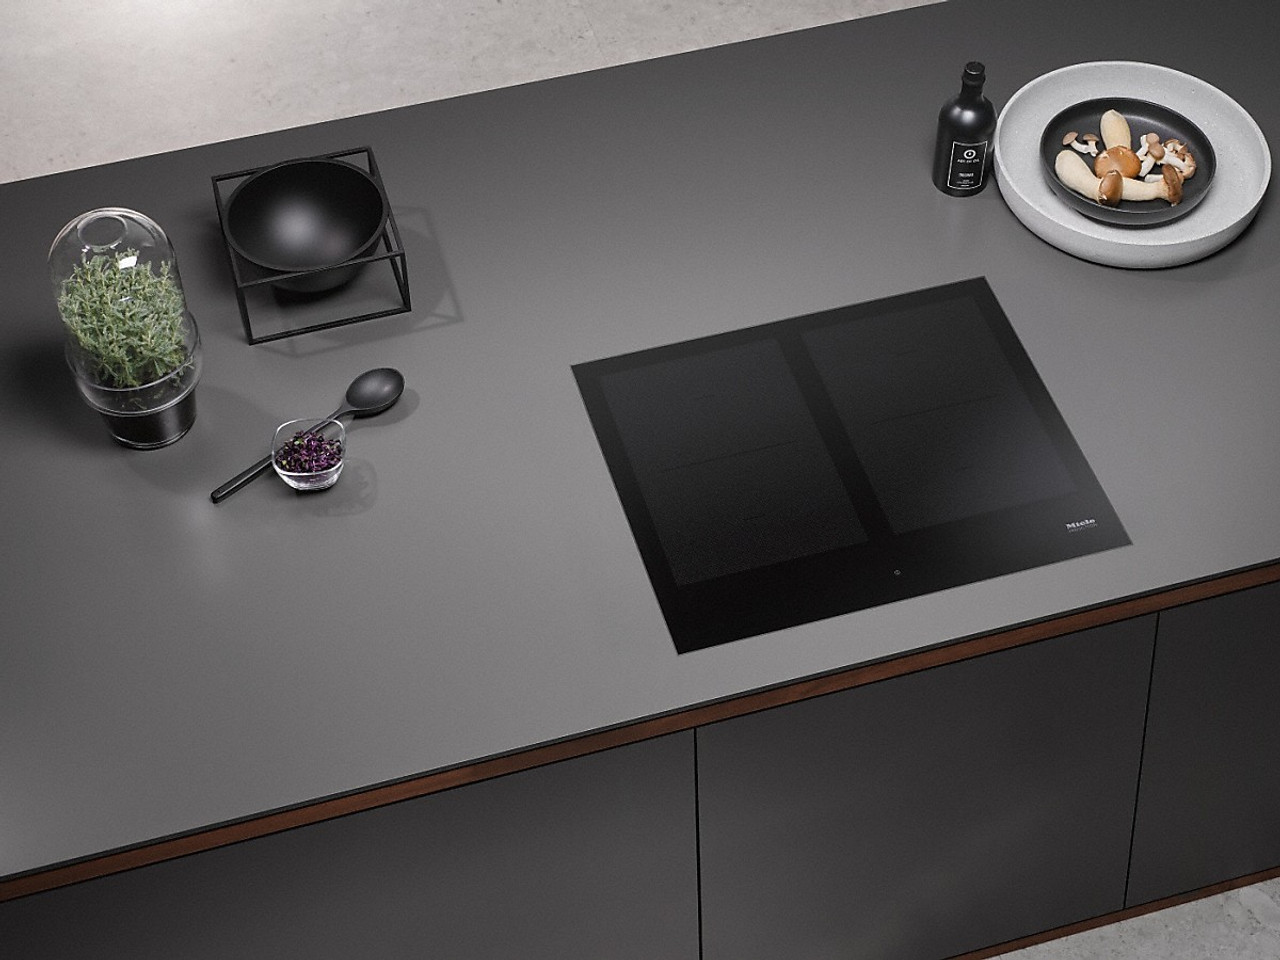 KM 7564 FL Induction Cooktop With Onset Controls